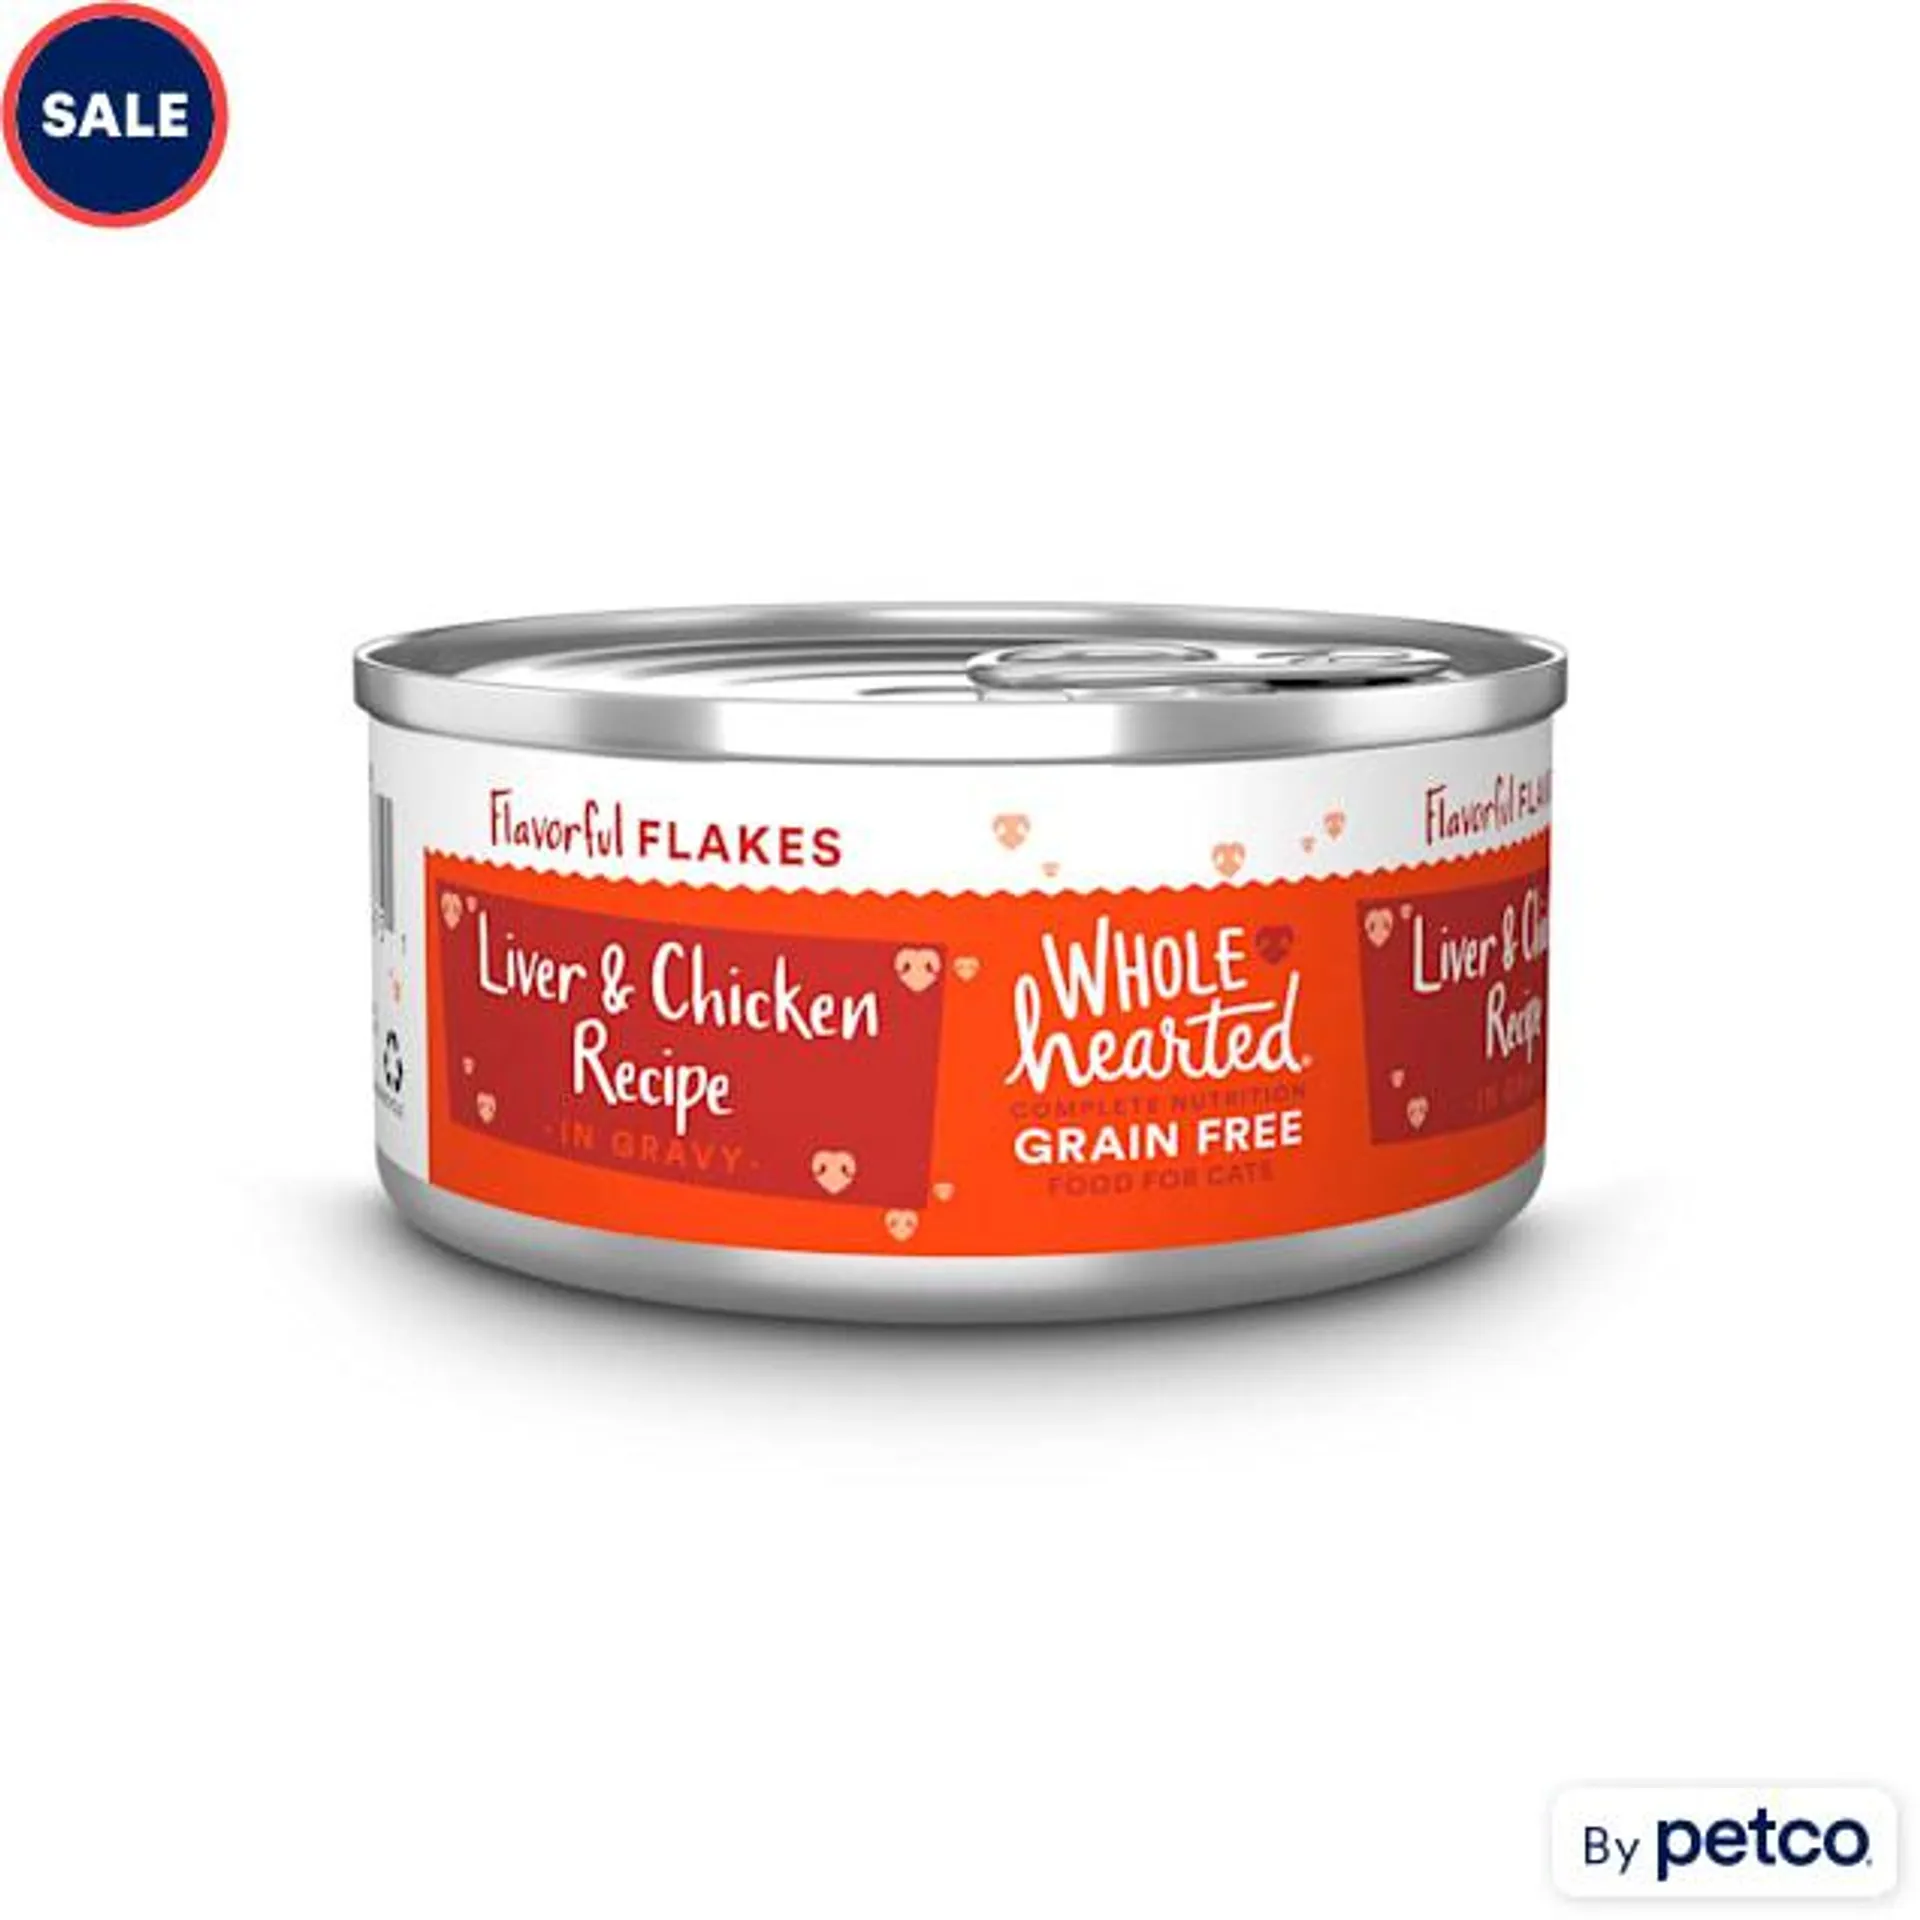 WholeHearted Grain-Free Chicken & Liver Recipe Flakes in Gravy Wet Cat Food, 5.5 oz., Case of 12